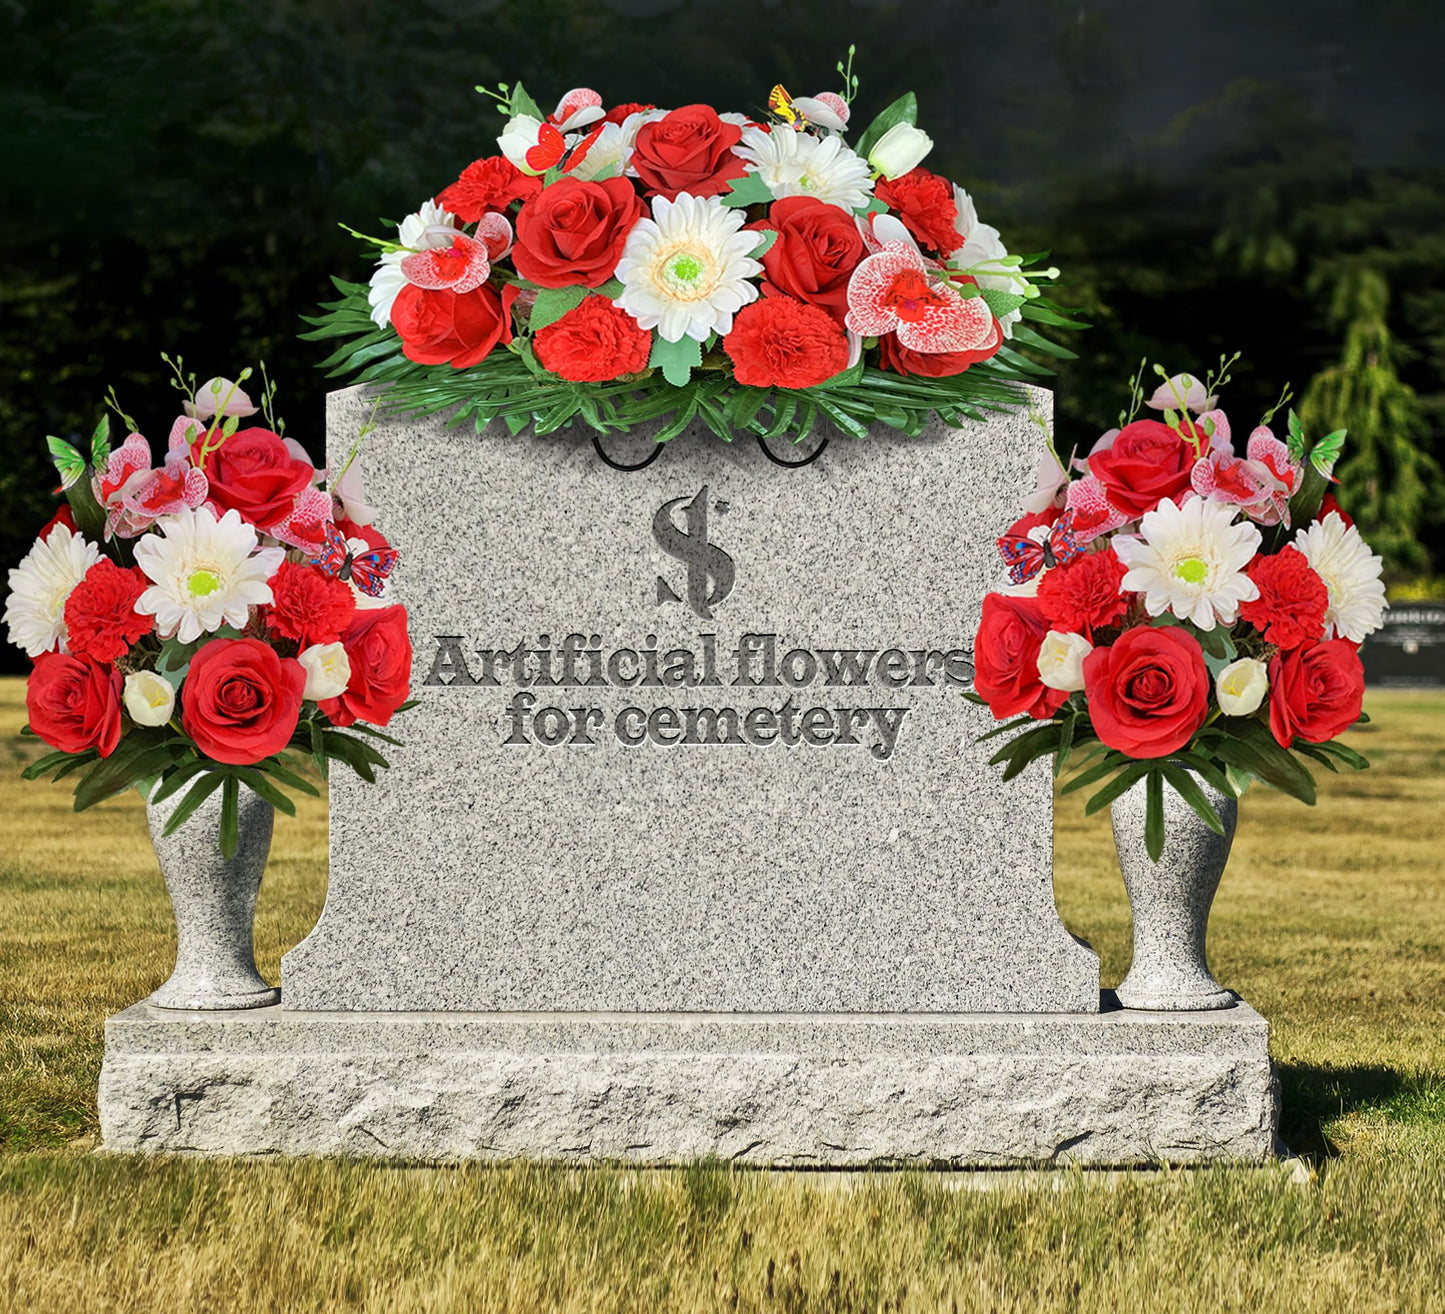 Saxili Cemetery Flower for Spring Grave Decoration, Artificial Headstone Flower Saddle，Graveside Memorial Arrangement，Non-Bleed Colors